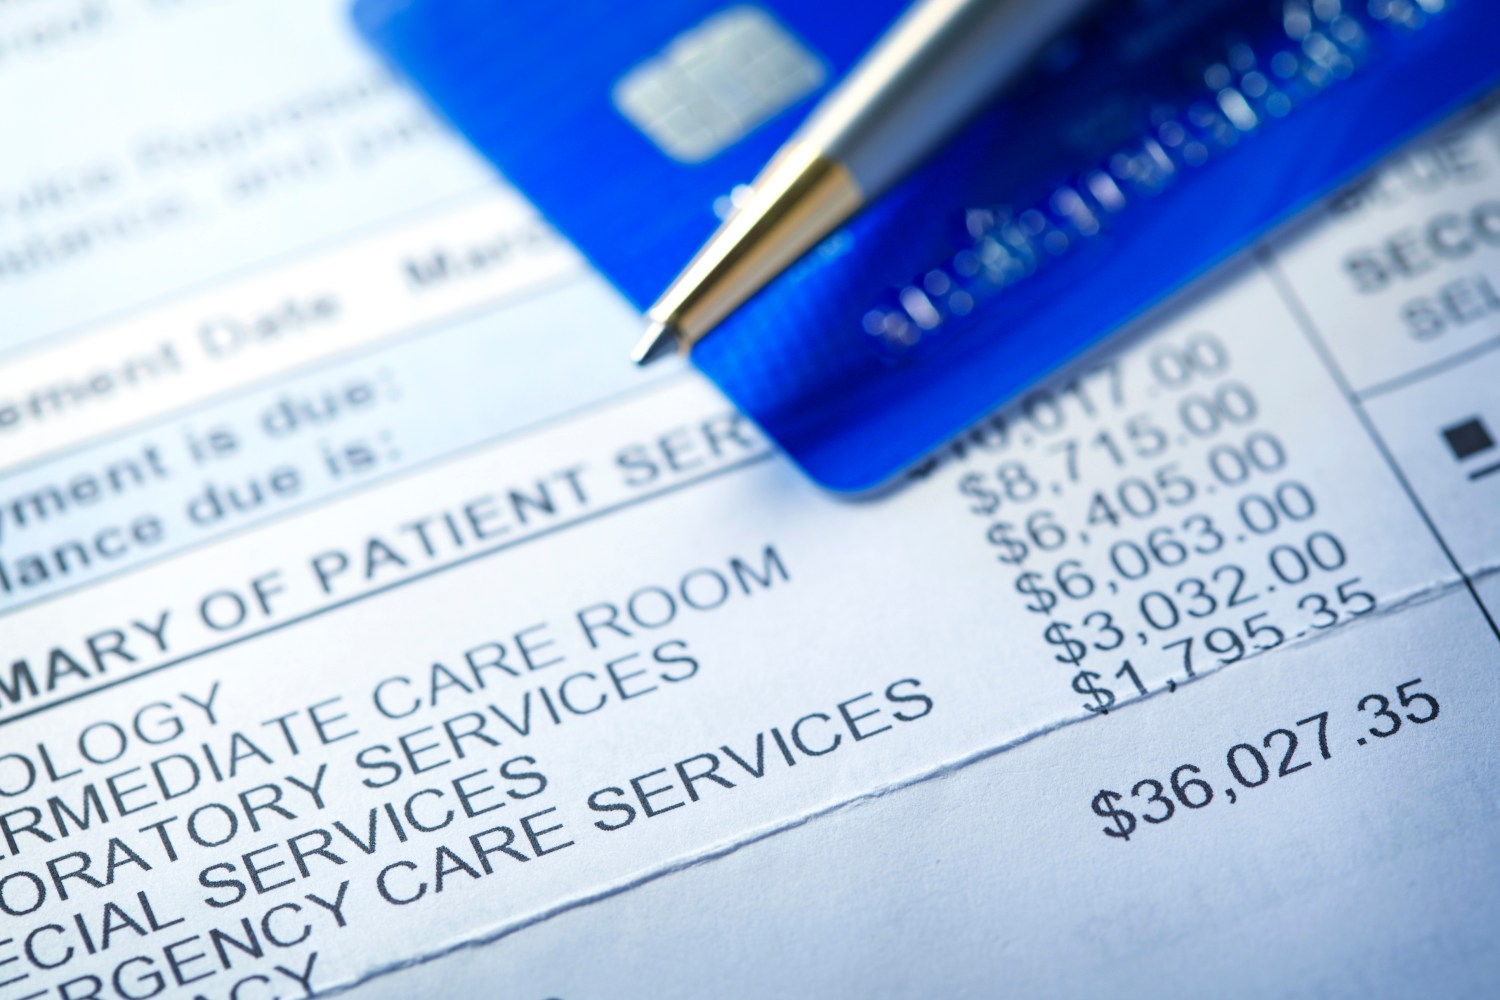 A hospital bill for $36,000 with a line item of various charges is photographed with a very shallow depth of field. A credit card and a ballpoint pen rest out of focus in the background.